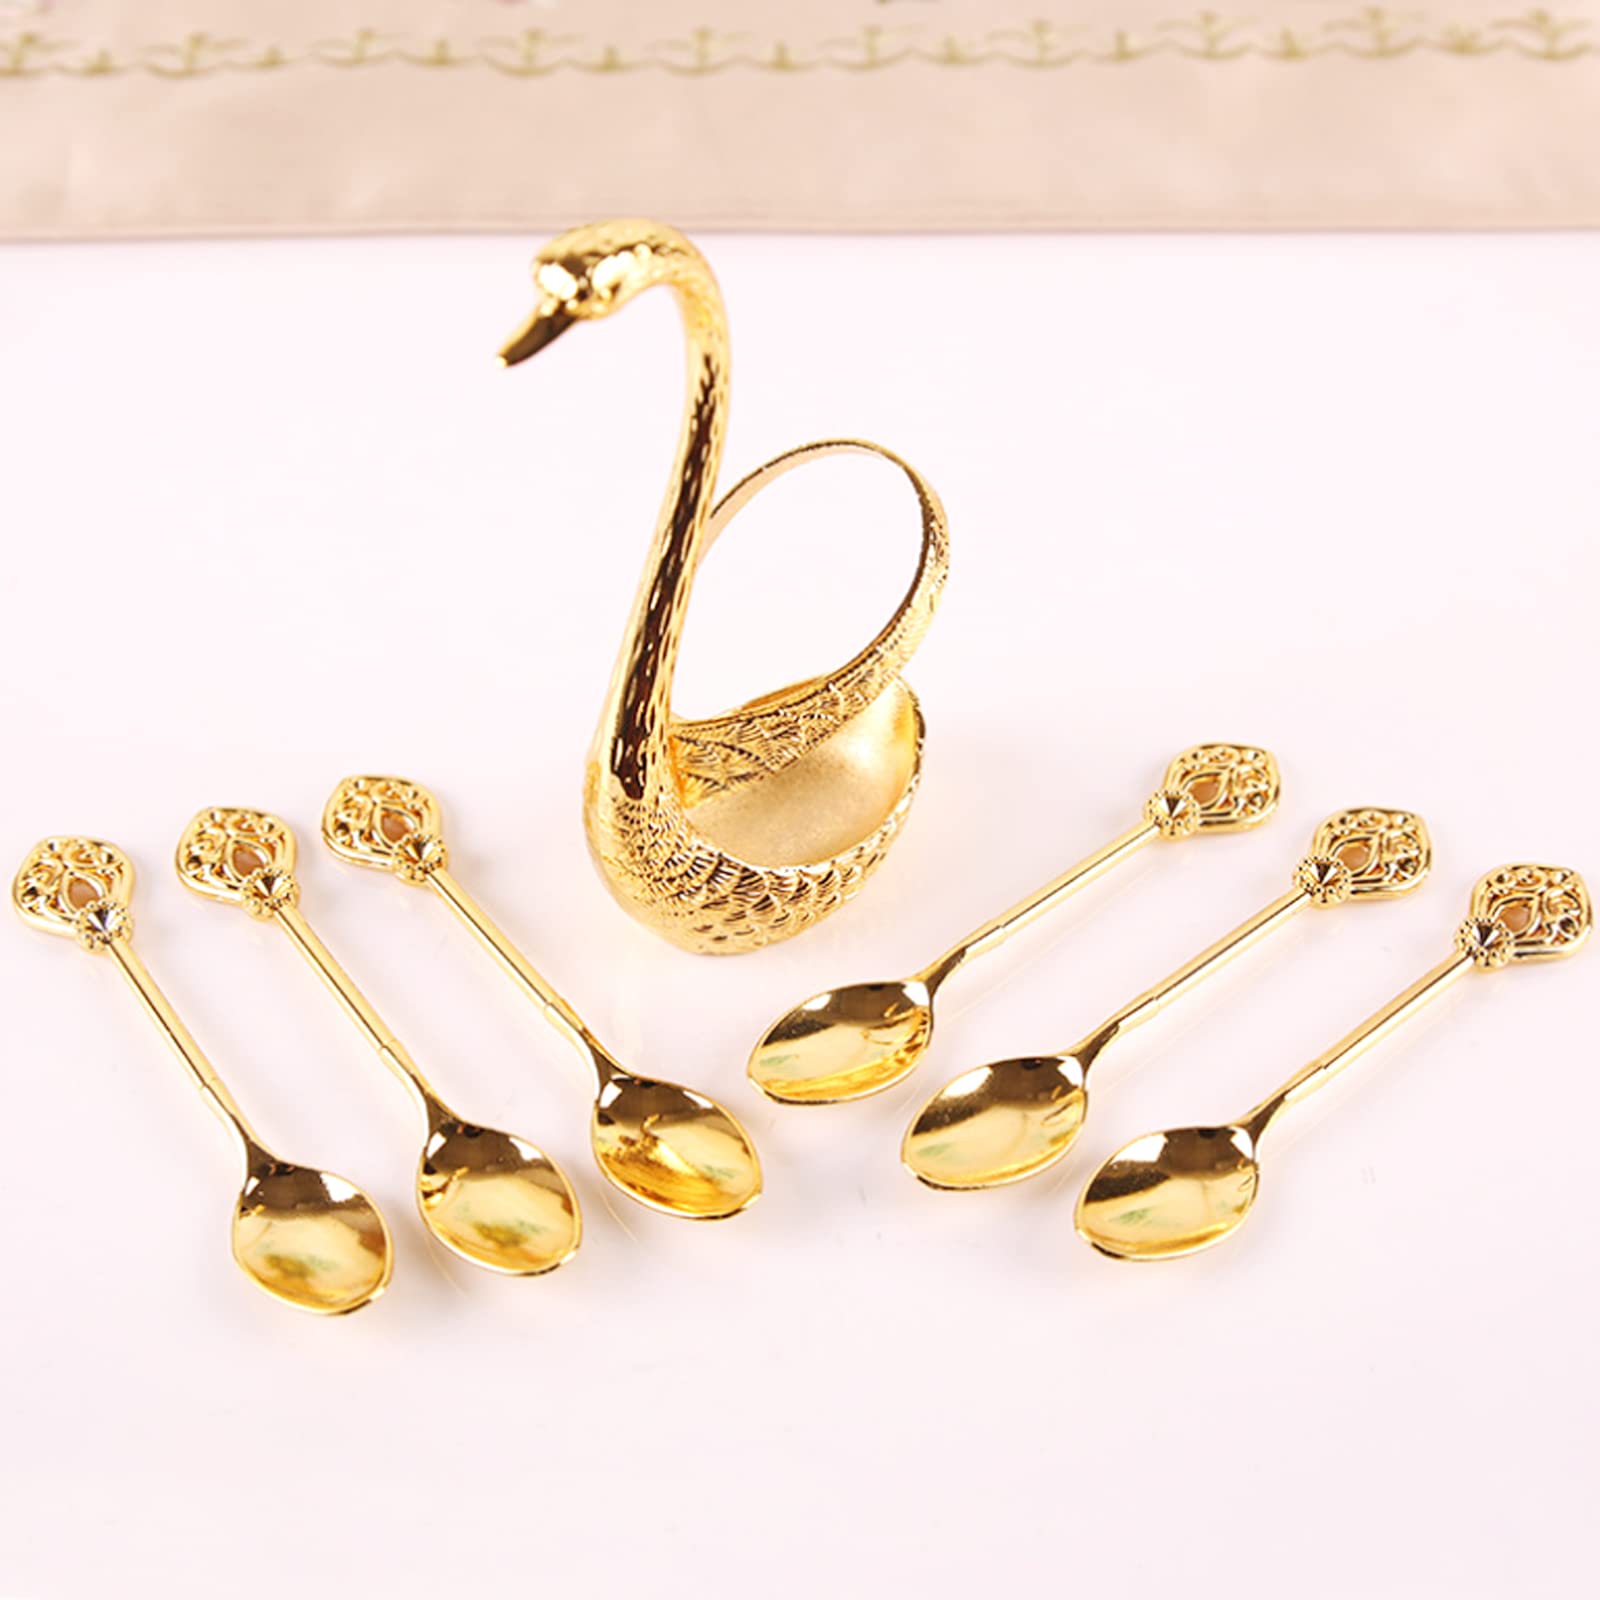 Decorative Gold Swan Base Holder with 6Pcs Coffee Spoon set, Metal Swan Base Holder Spoon Organizer with 6 Spoons, Small Delicate Spoons for Coffee Fruit Dessert Ice Cream Cake